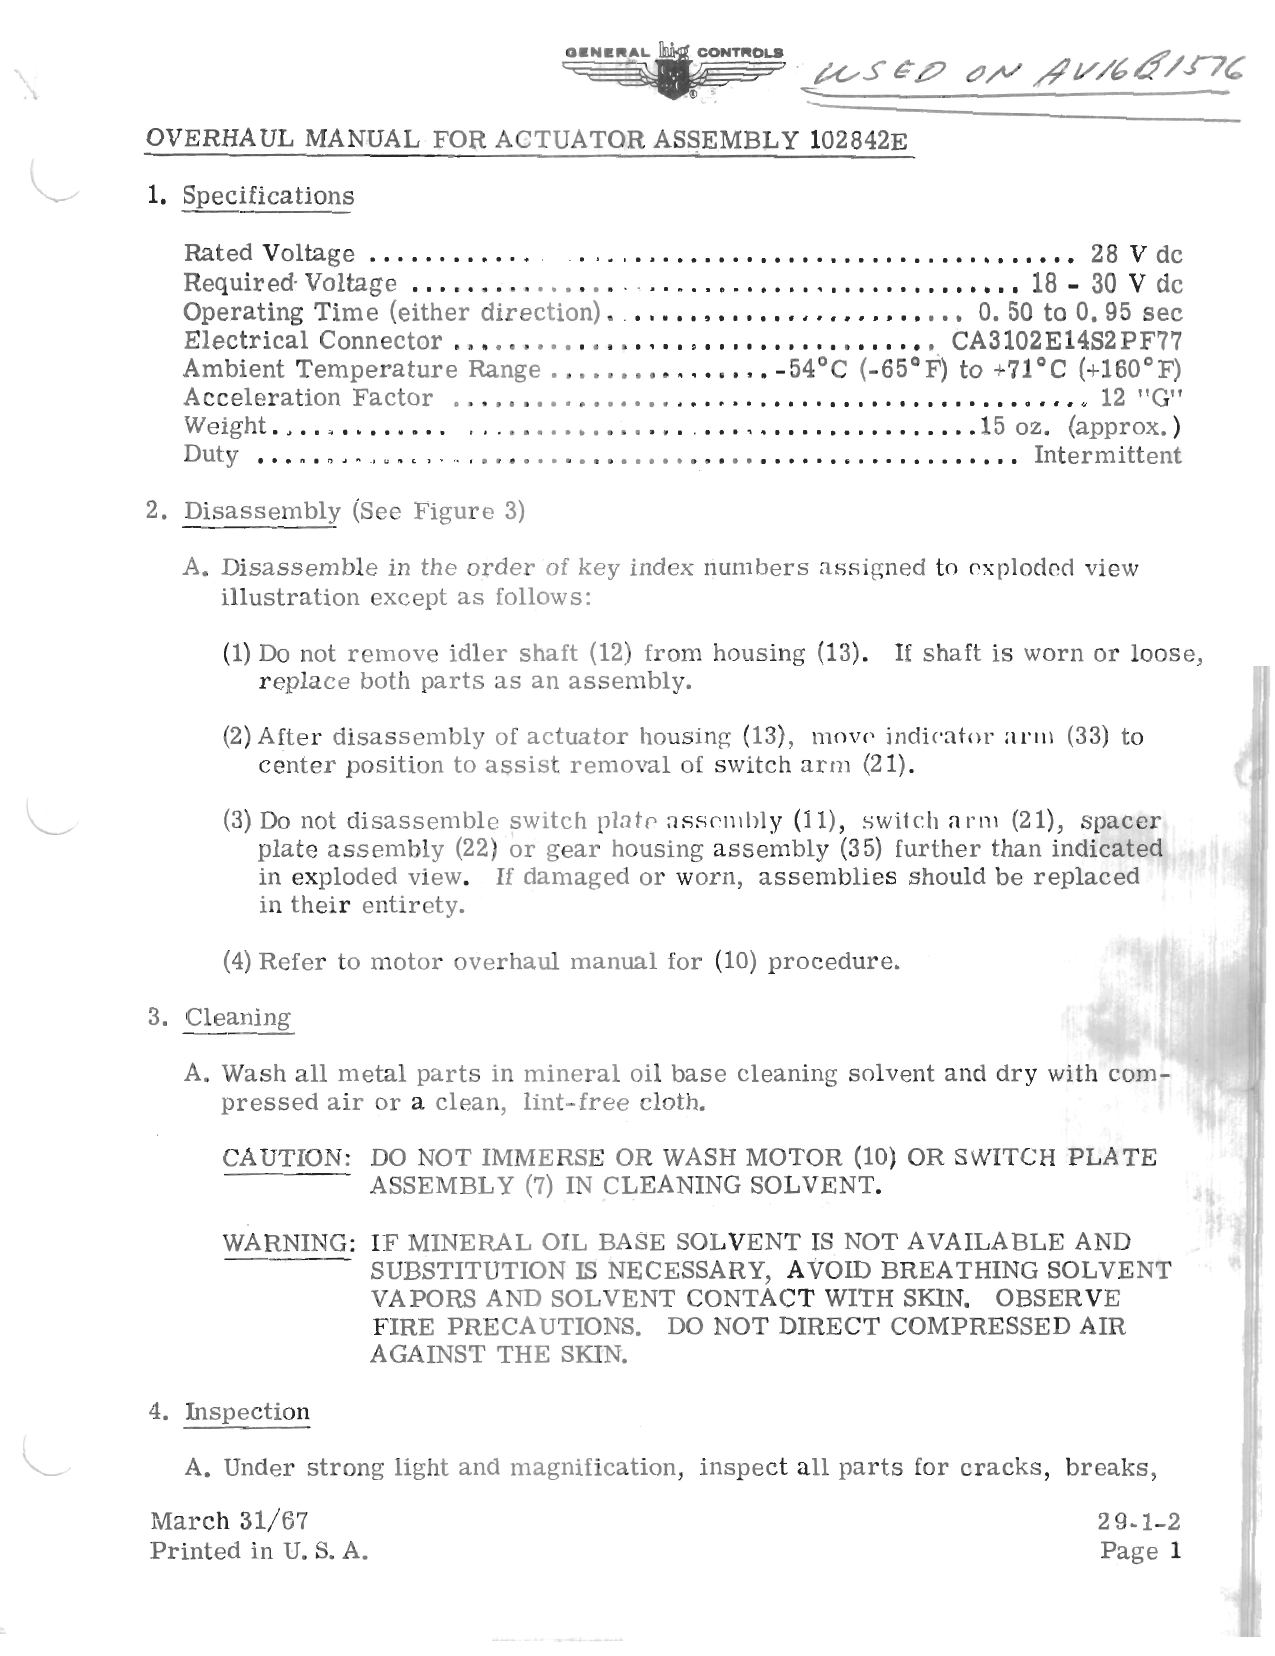 Sample page 1 from AirCorps Library document: Overhaul Manual for Actuator Assembly 102842E 